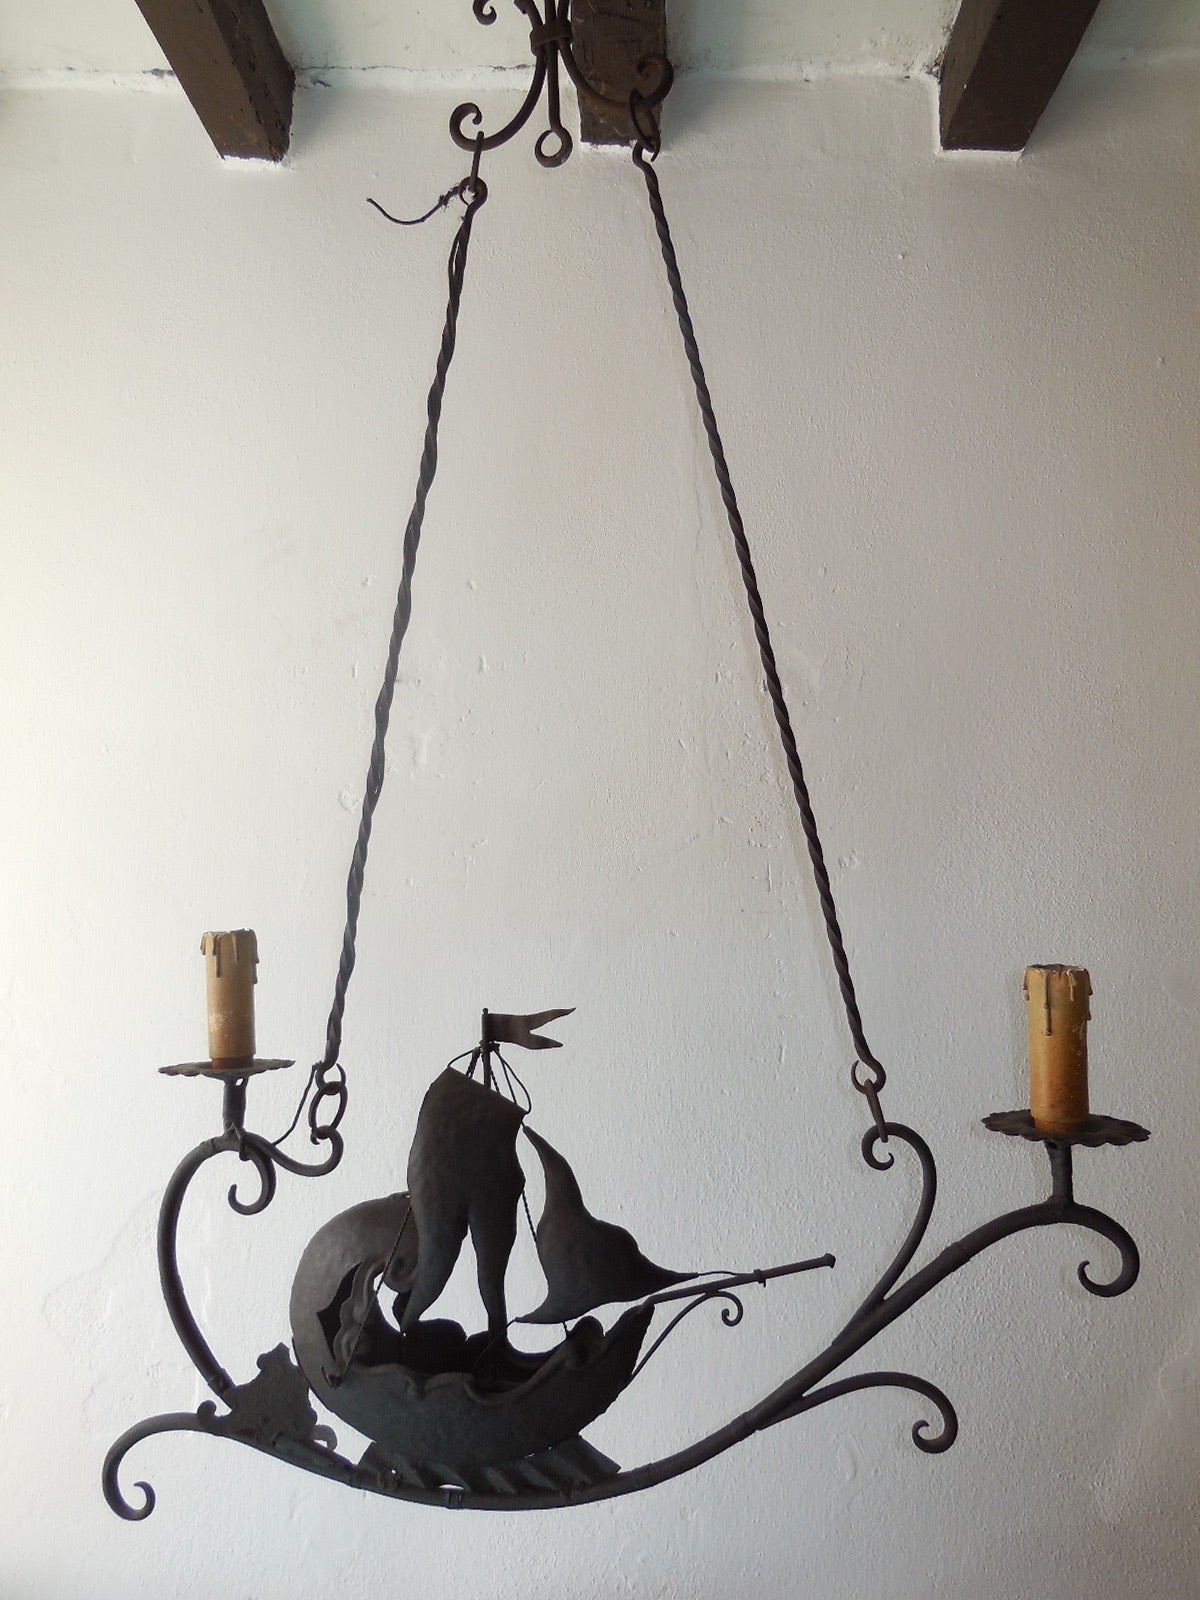 Hand forged wrought iron.  Wonderful detailing with moving flag and water.  Housing 2 lights.  From Flag to bottom measures 16 inches.  Rewired and ready to hang.  Free shipping from Italy.